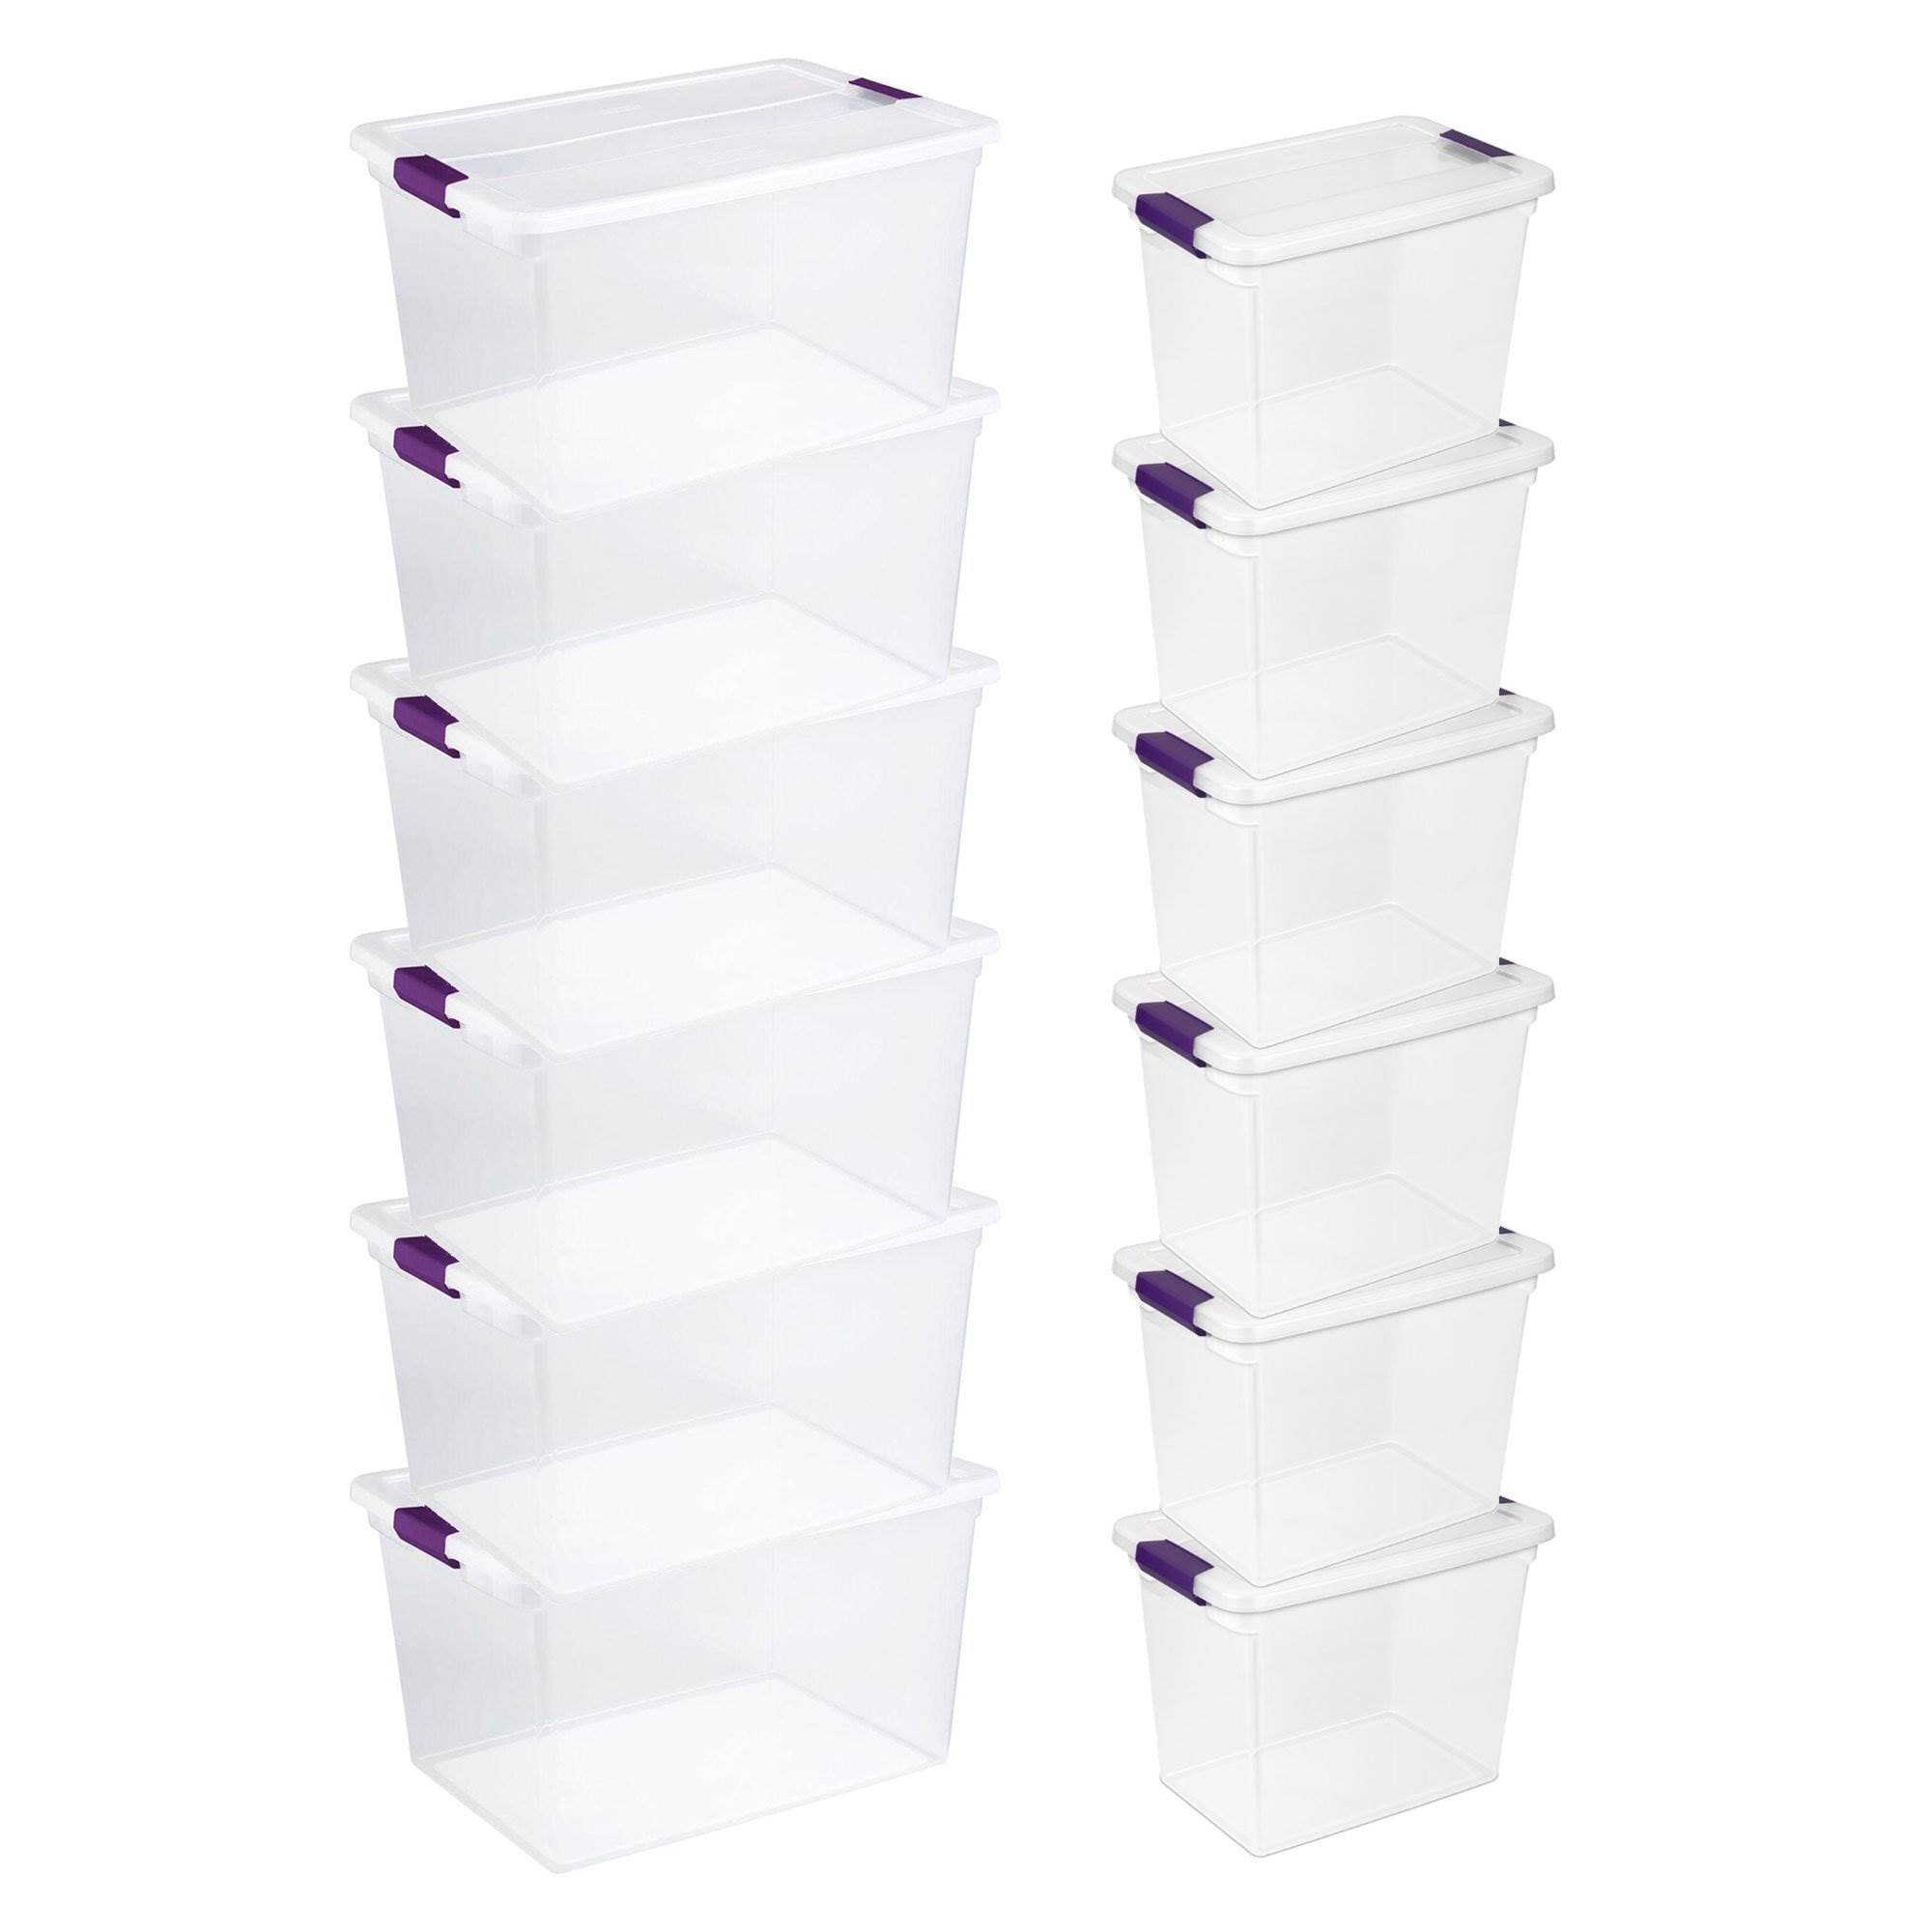  Sterilite 66 Qt ClearView Latch Storage Box, Stackable Bin  with Latching Lid, Plastic Container to Organize Clothes in Closet, Clear  Base, Lid, 6-Pack - Lidded Home Storage Bins